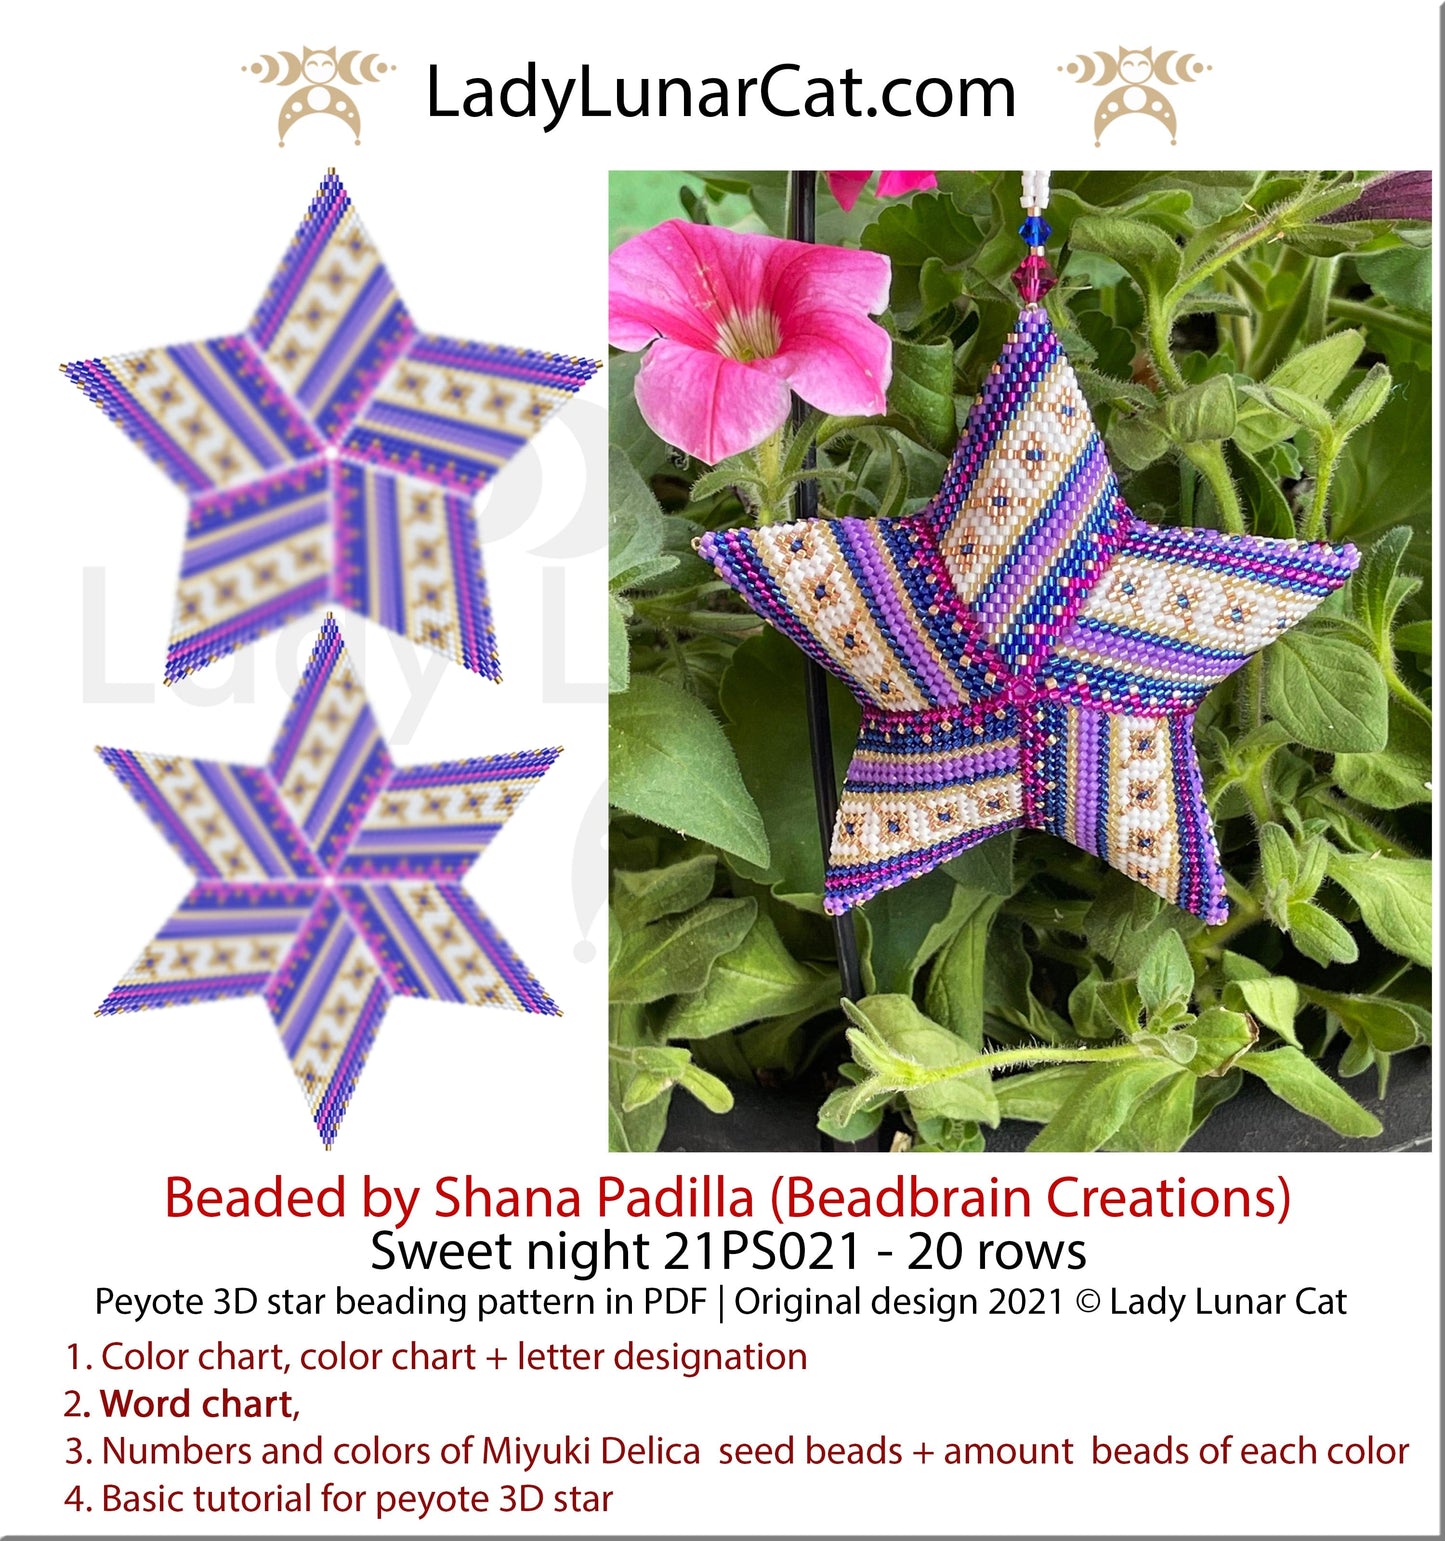 Beaded star pattern for beading- Sweet night 21PS021 20 rows LadyLunarCat